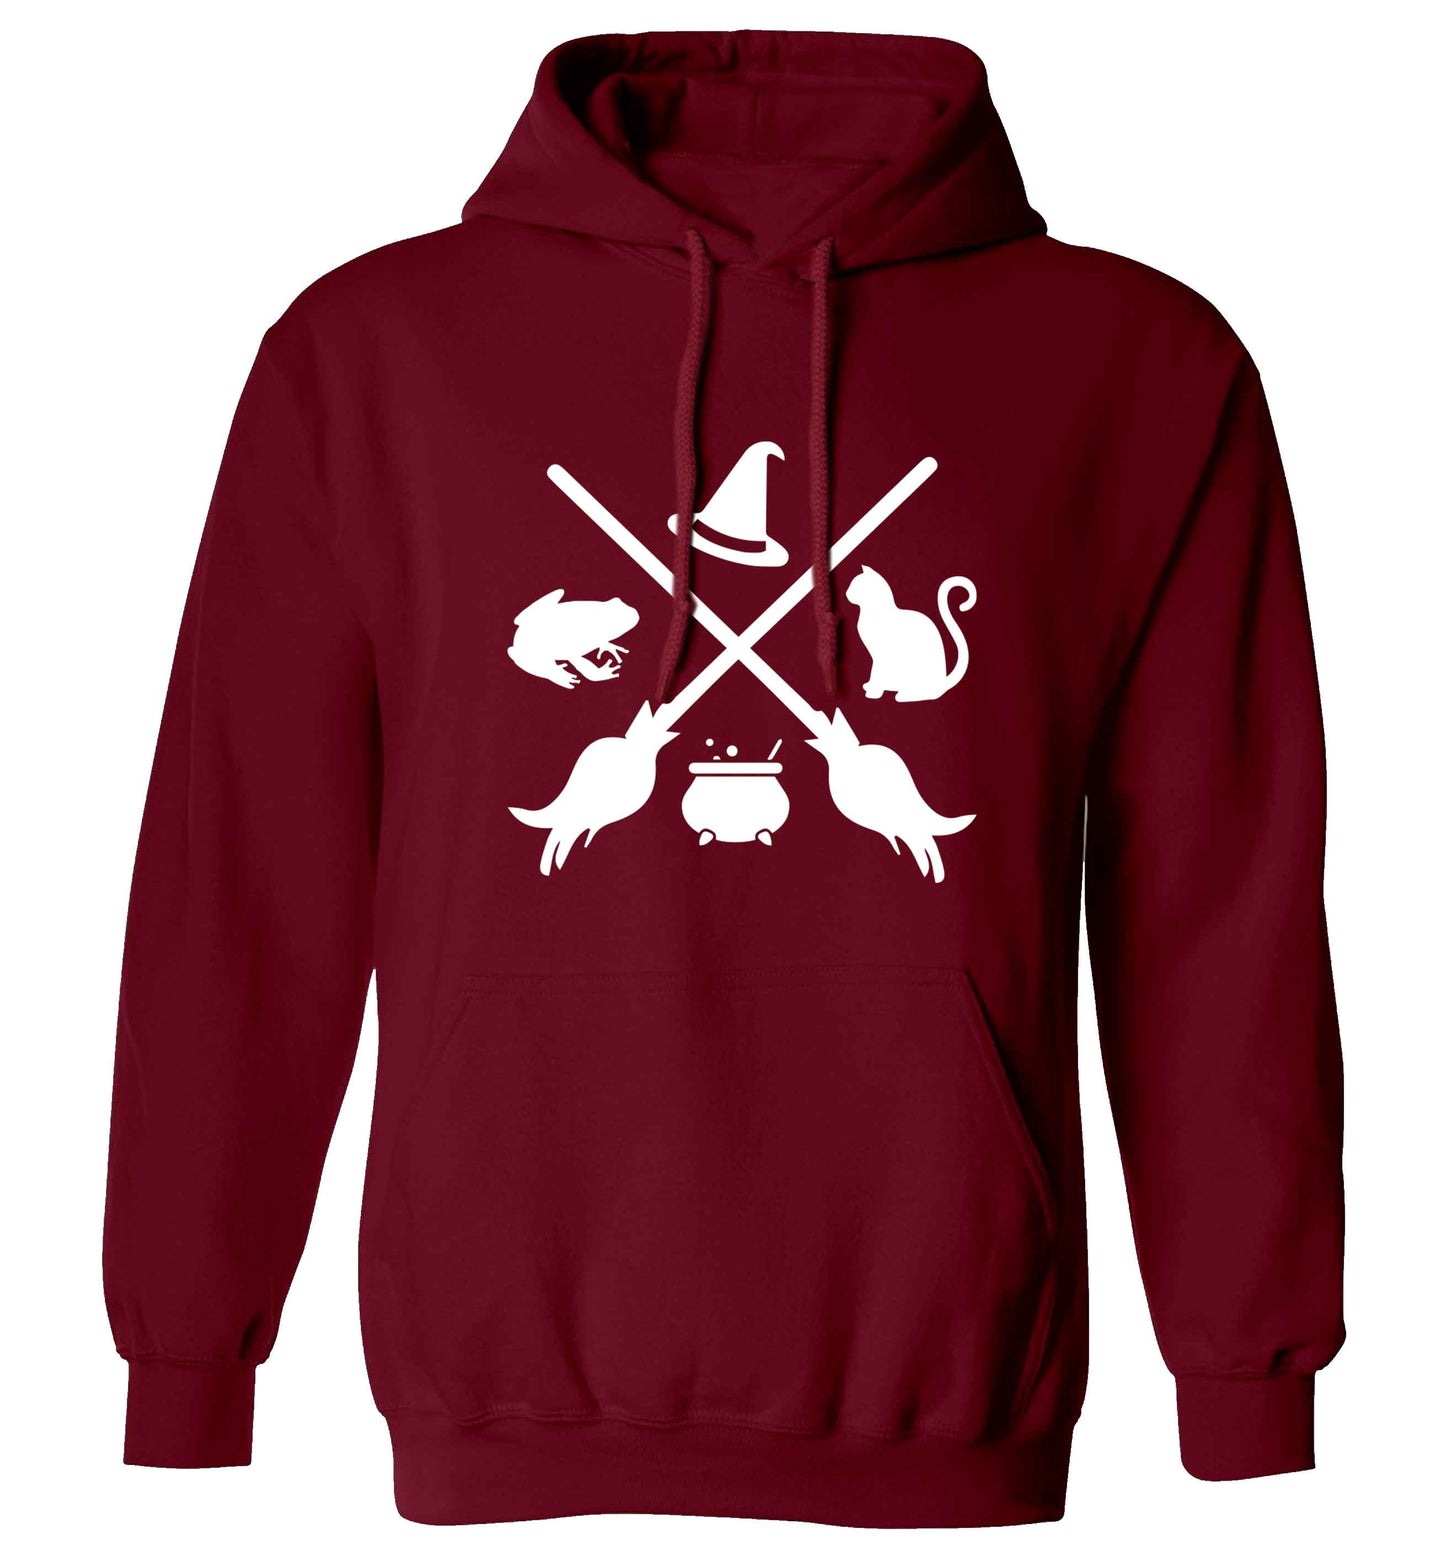 Witch symbol adults unisex maroon hoodie 2XL